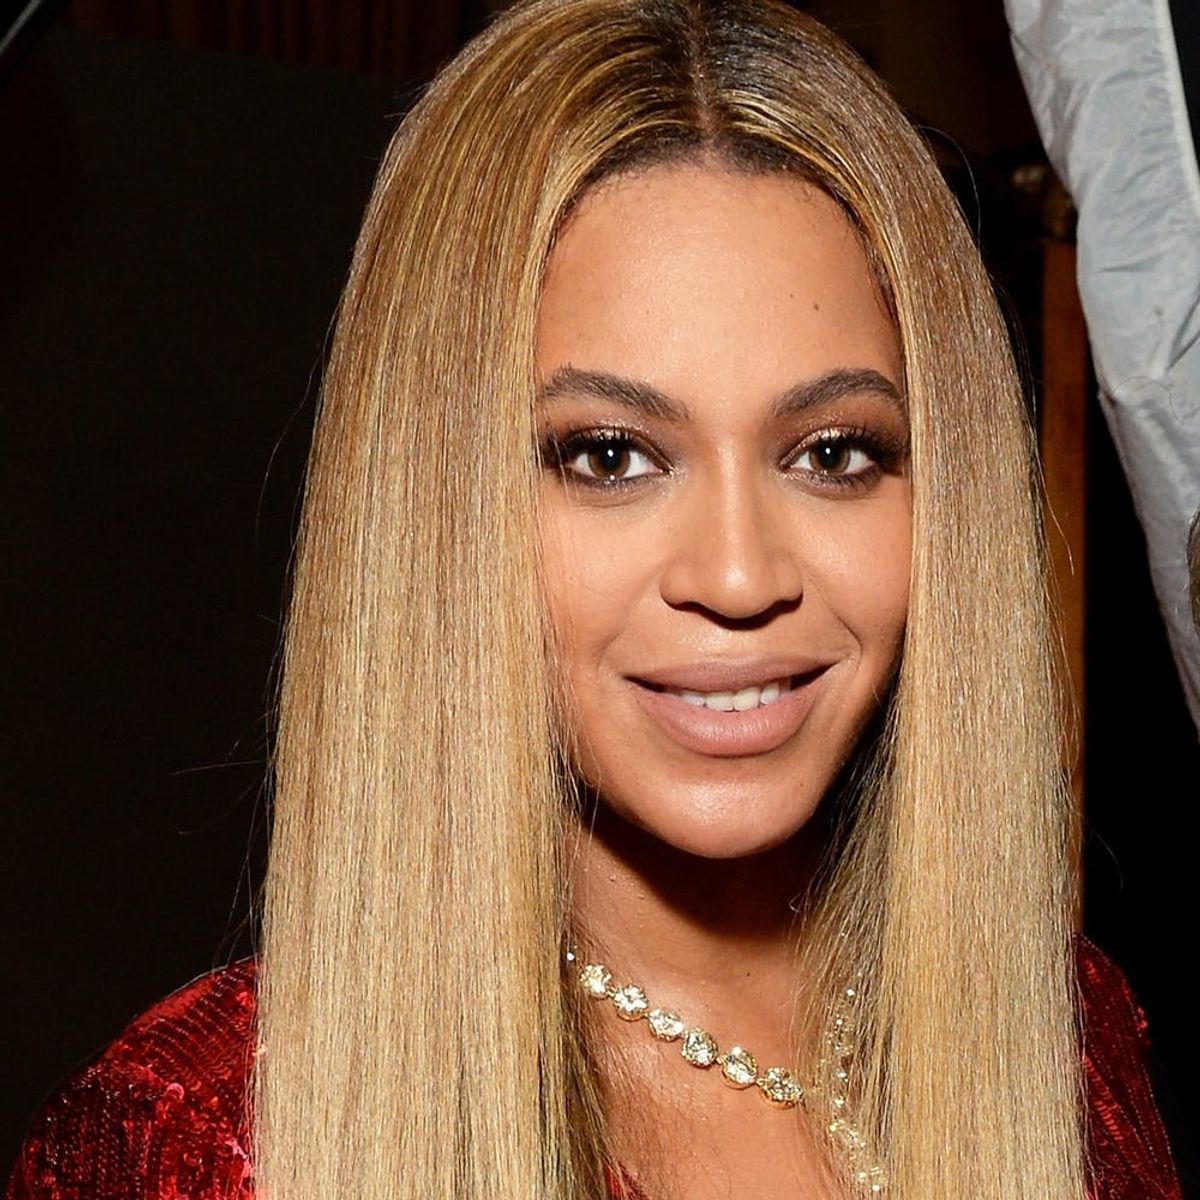 Stop What You’re Doing and Read This Open Letter from Celebs (Beyoncé Included) About Gender Equality